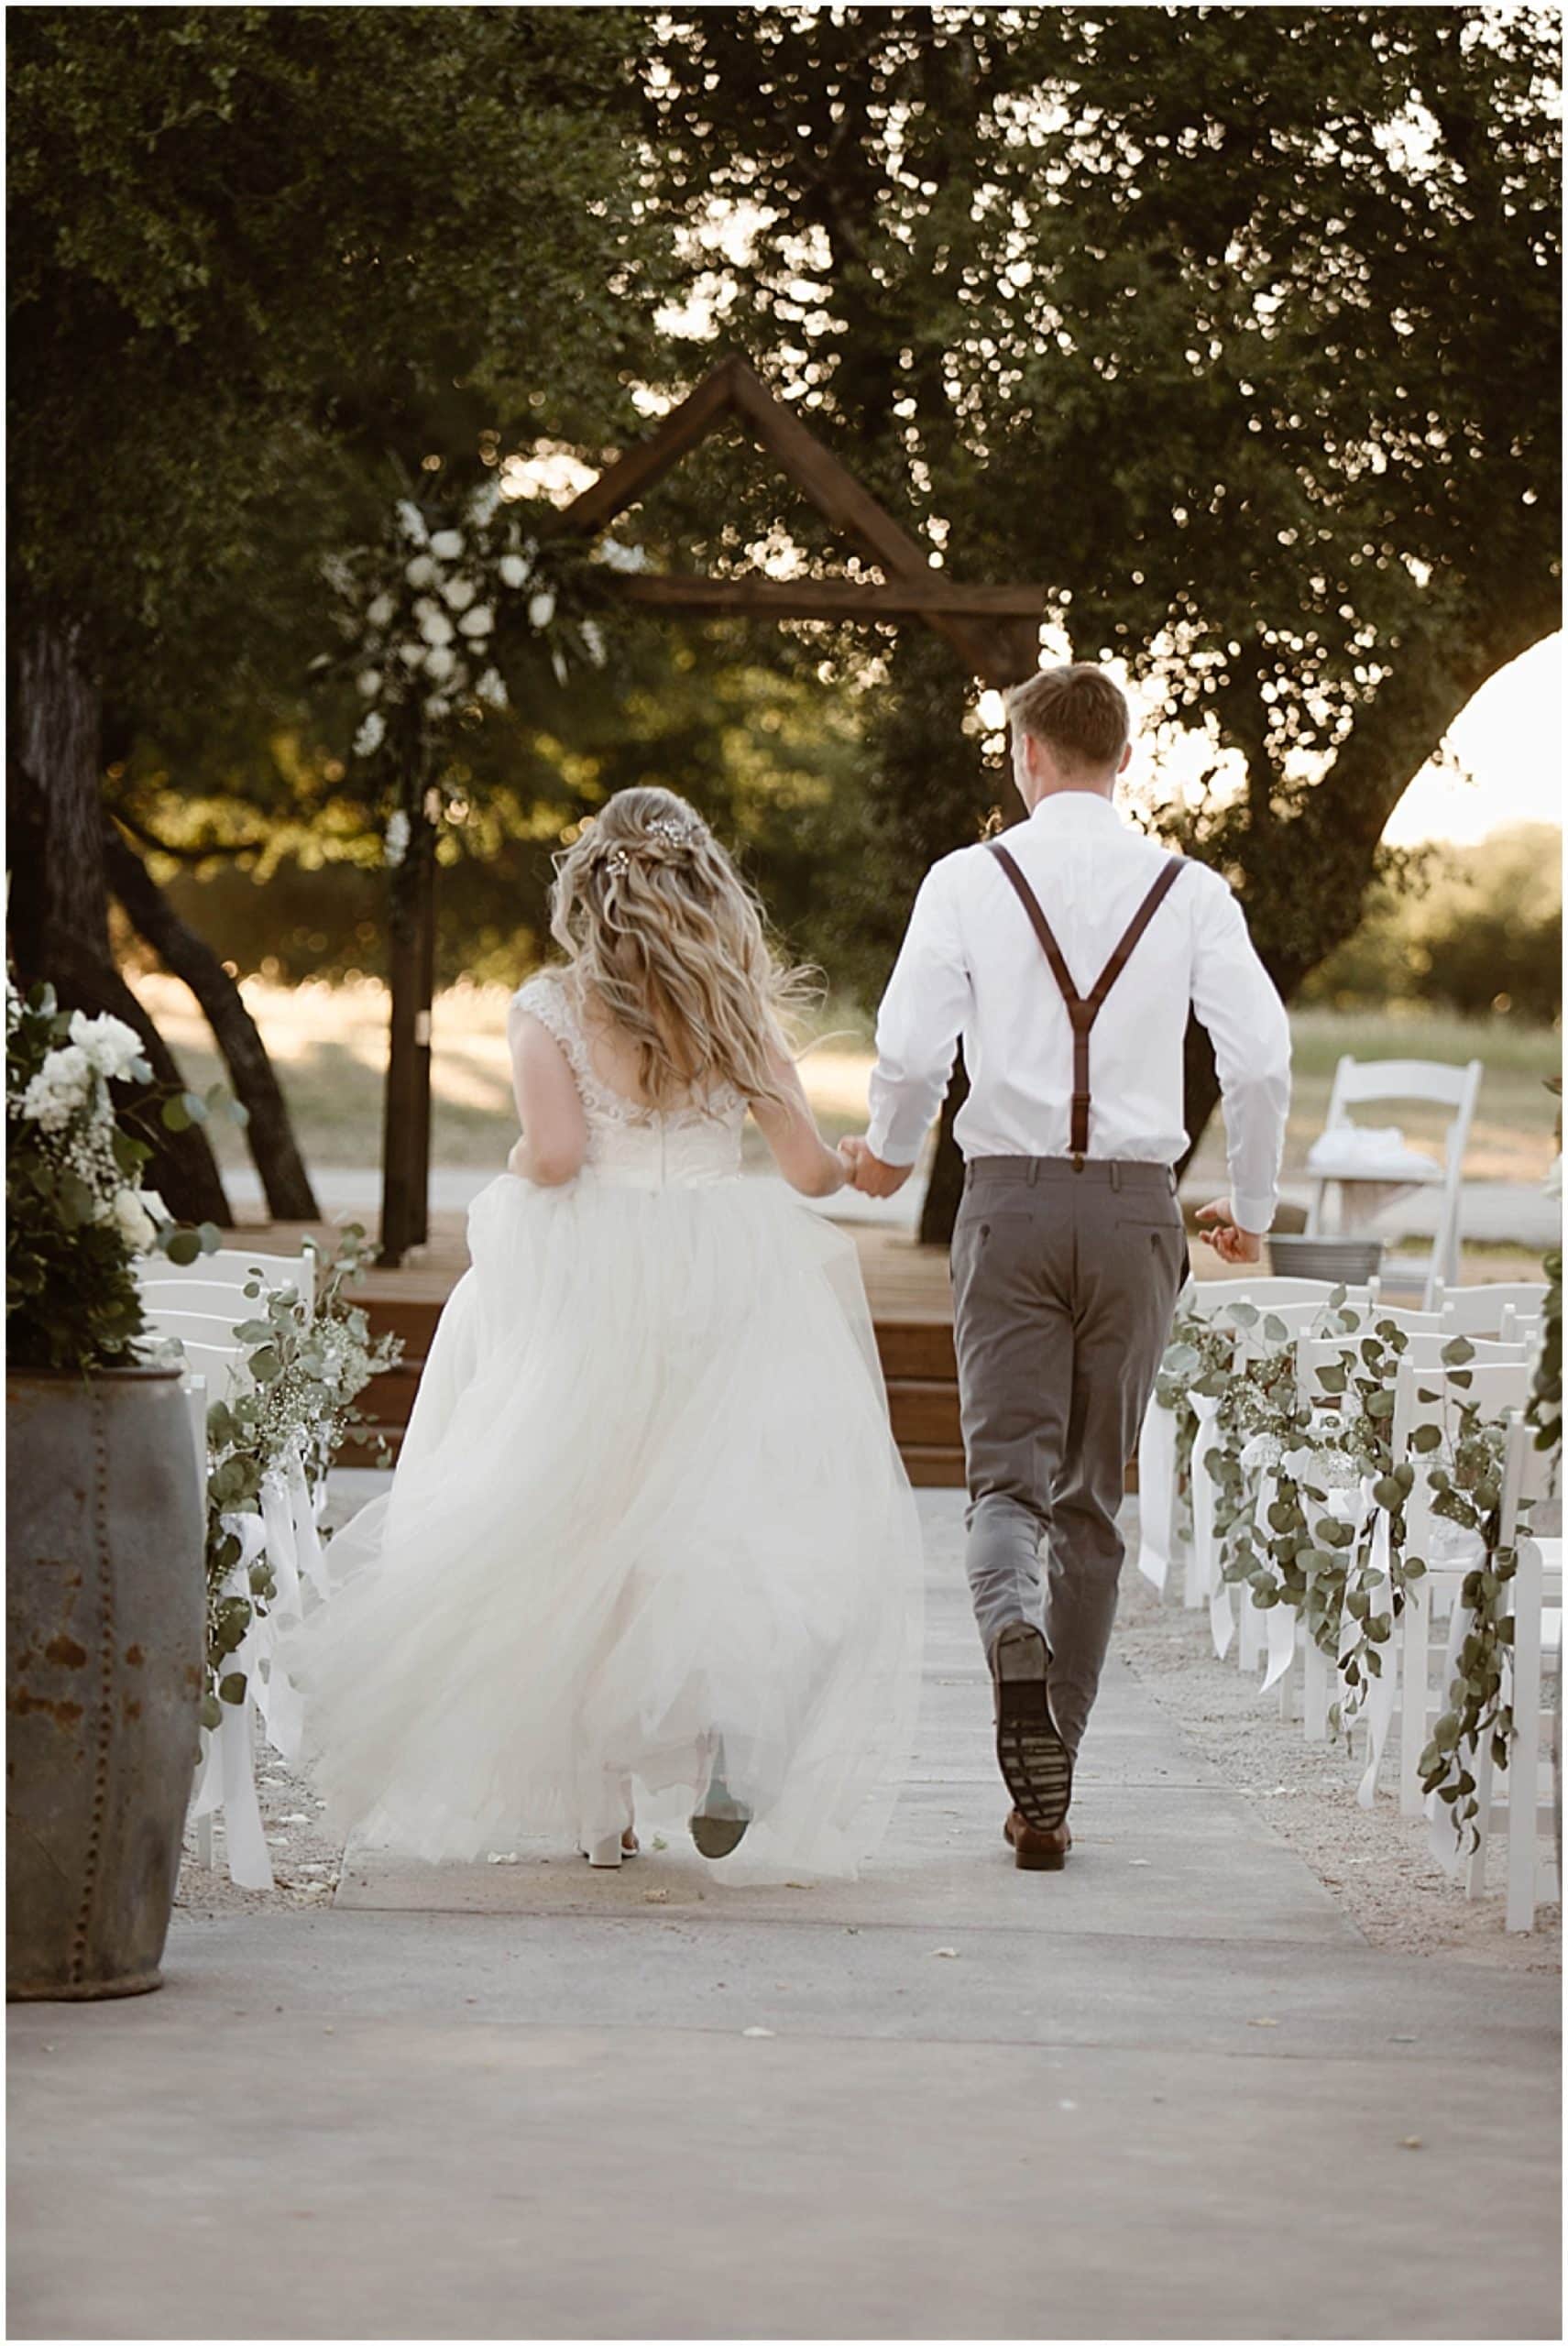 bride and groom running down aisle, Brit Nicole Photography, West Texas Barn Wedding, West Texas Small Wedding, West Texas wedding venue, DJ Platinum, Vera Wang engagement ring, Zales Manly Bands wedding ring, David's Bridal wedding dress, Krazy Cakes brides wedding cake, wedding cupcake, Betsey Johnson wedding high heels, Joy's Downtown Flowers wedding decor, Sparrow Creek Ranch, texas wedding ranch, places to get married in Texas, small intimate wedding, summer wedding, texas sky, bride and groom first look, first look with dad, matching bridesmaids robes, June wedding, junebug weddings, wandering weddings, the knot, best weddings